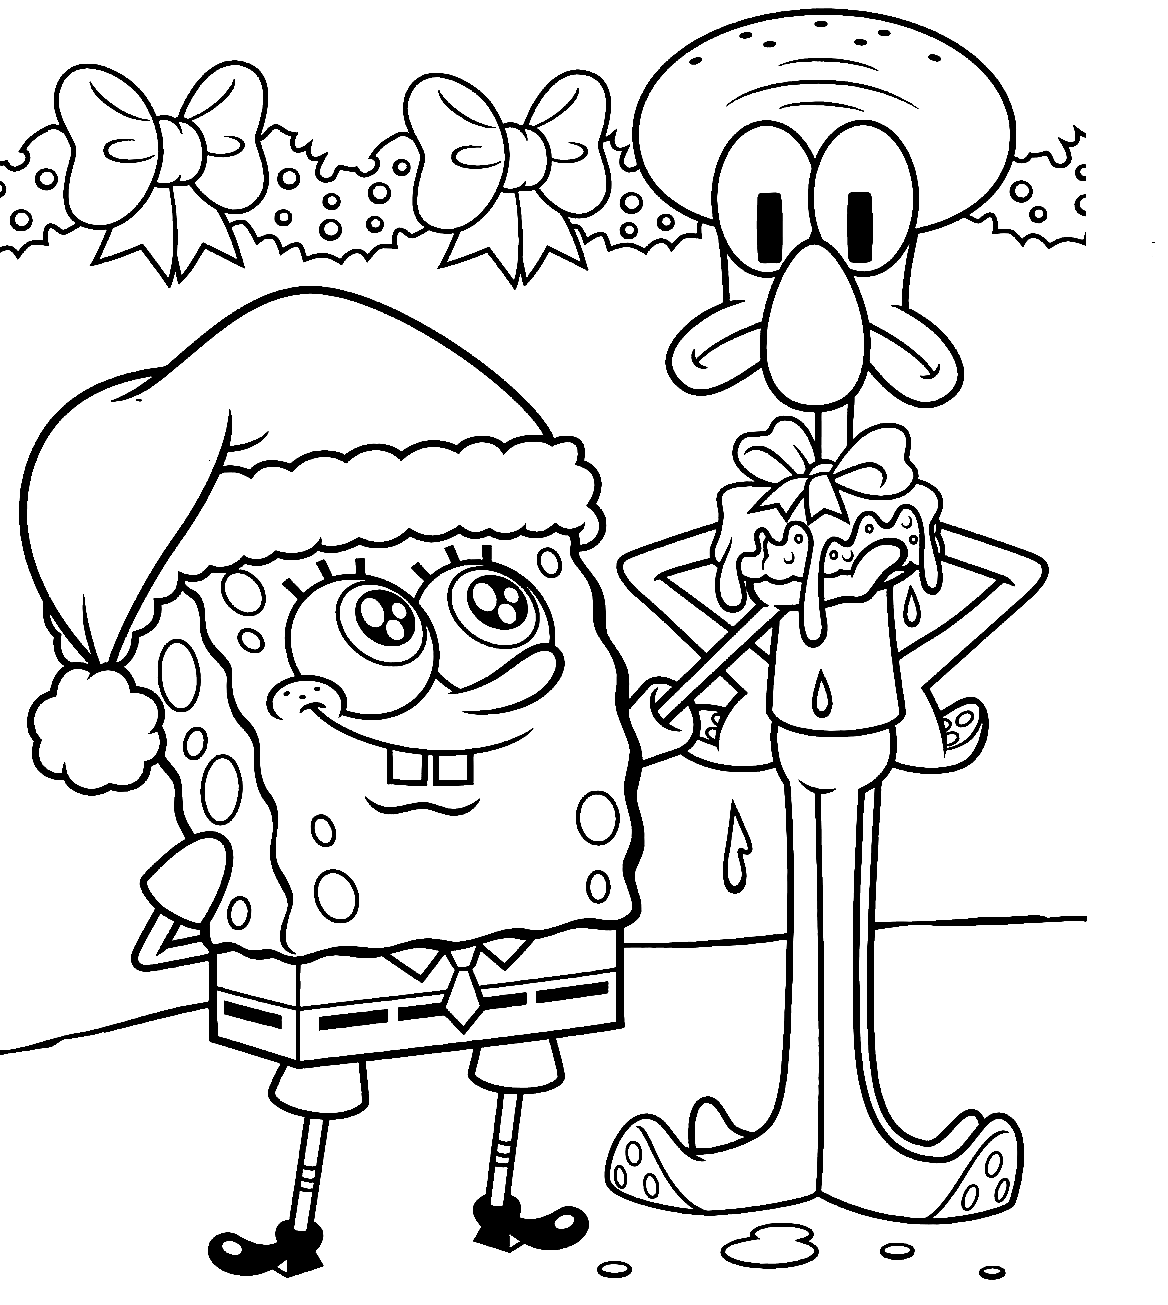 Squidward Tentacles And SpongeBob Coloring Page